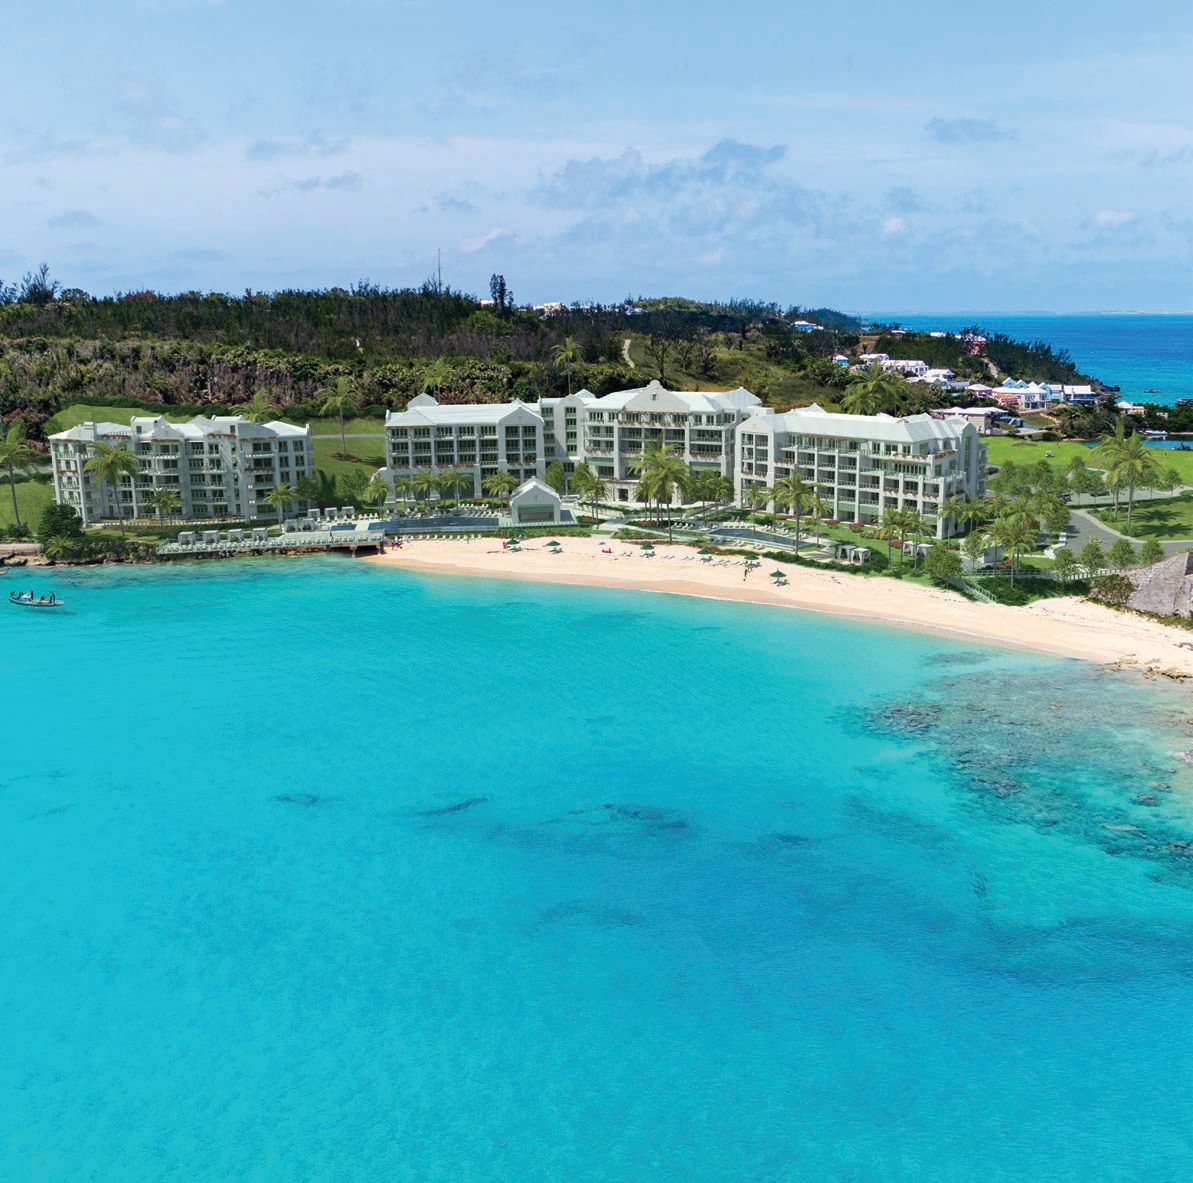 A look at the property, which is inspired by traditional Bermudian cottages PHOTO COURTESY OF THE ST. REGIS BERMUDA RESORT